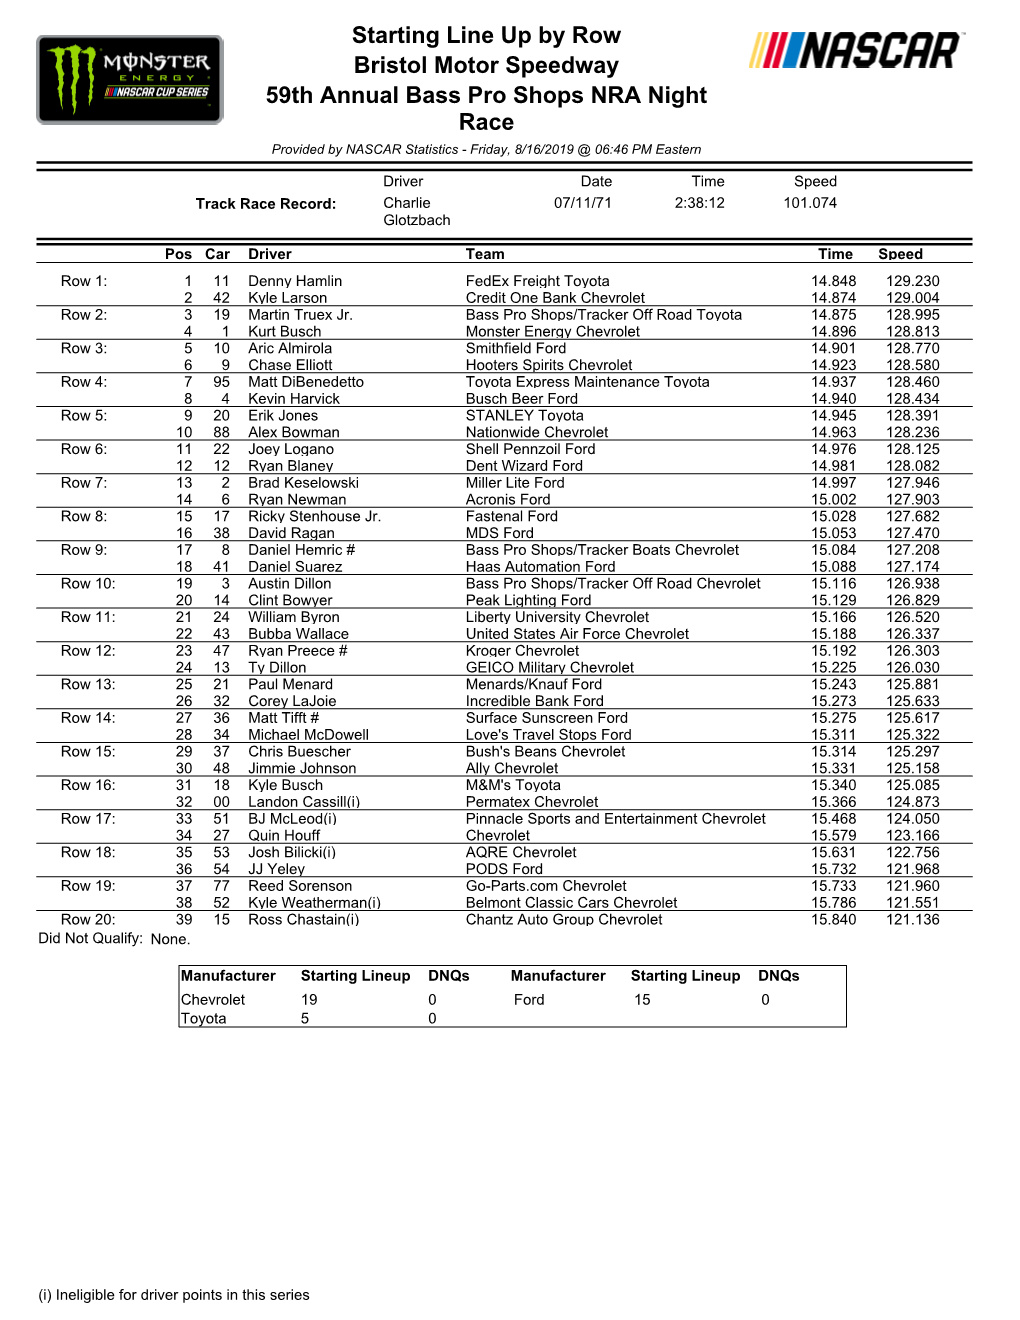 Starting Line up by Row Bristol Motor Speedway 59Th Annual Bass Pro Shops NRA Night Race Provided by NASCAR Statistics - Friday, 8/16/2019 @ 06:46 PM Eastern